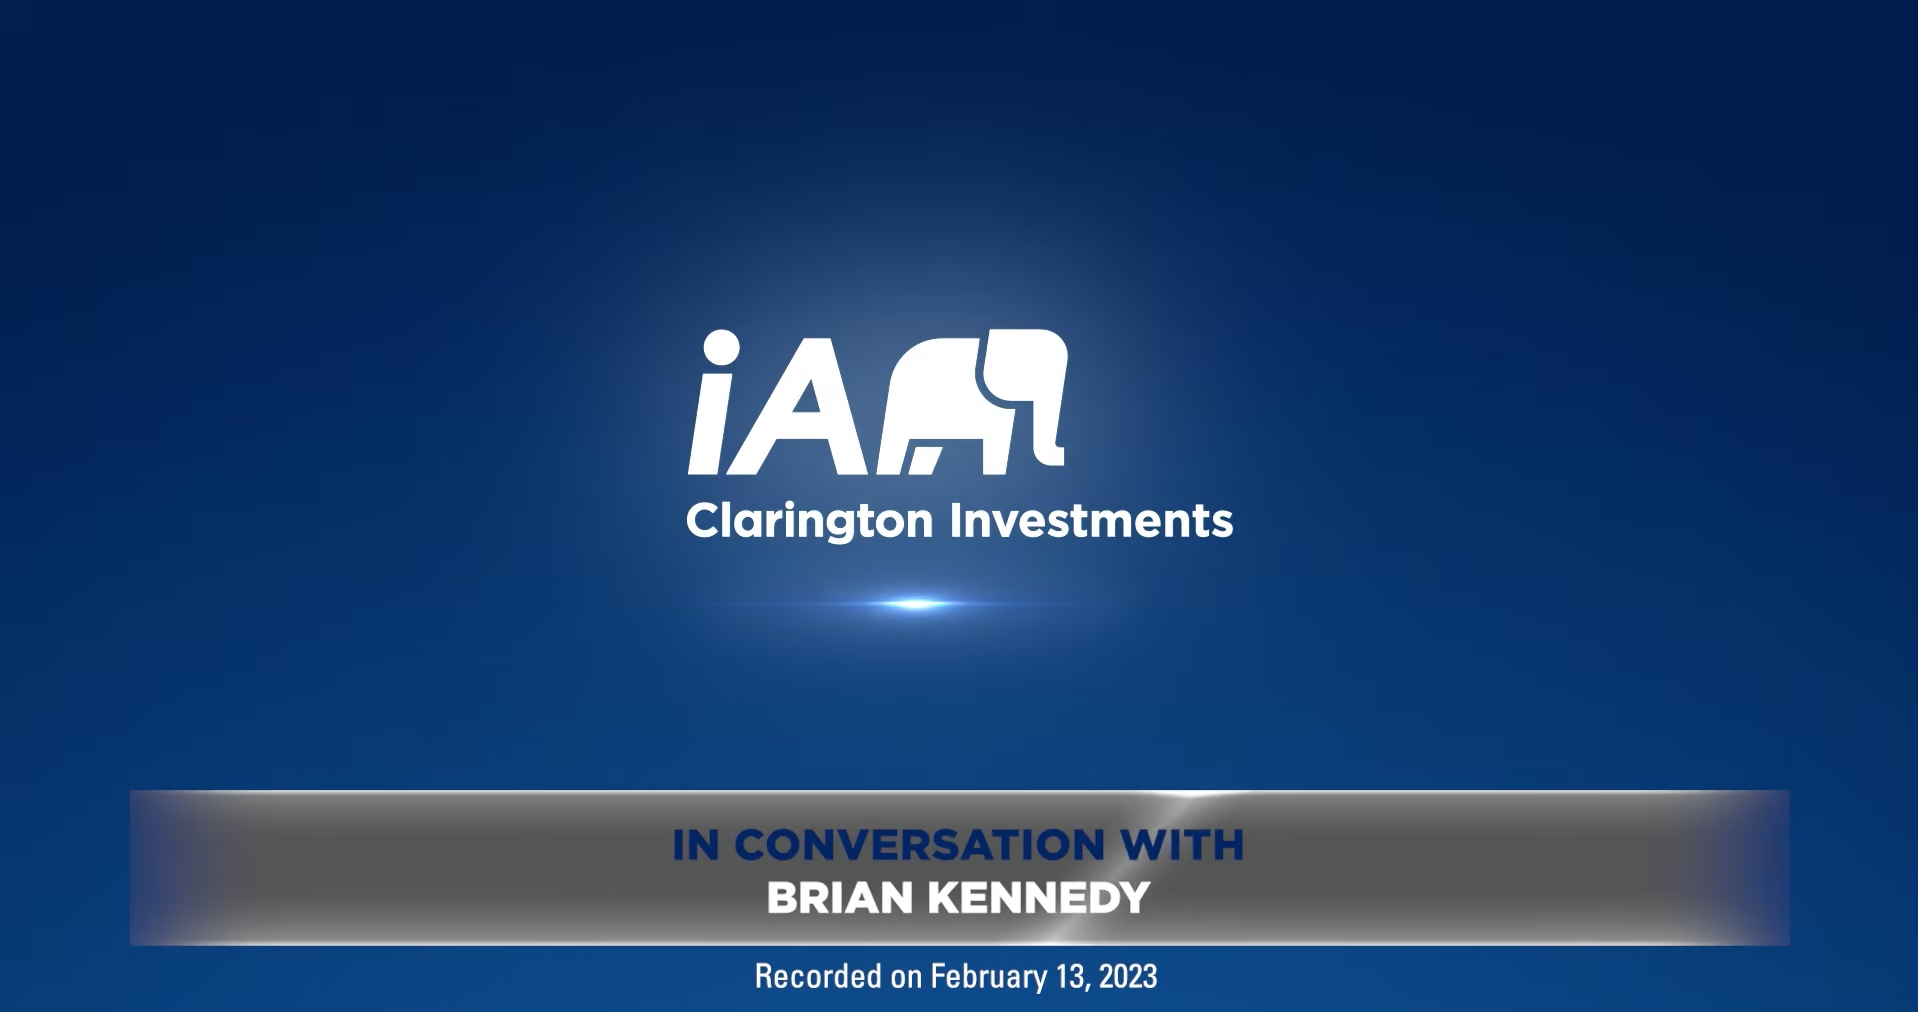 Brian Kennedy provides an update on the IA Clarington Loomis Global Multisector Bond Fund.